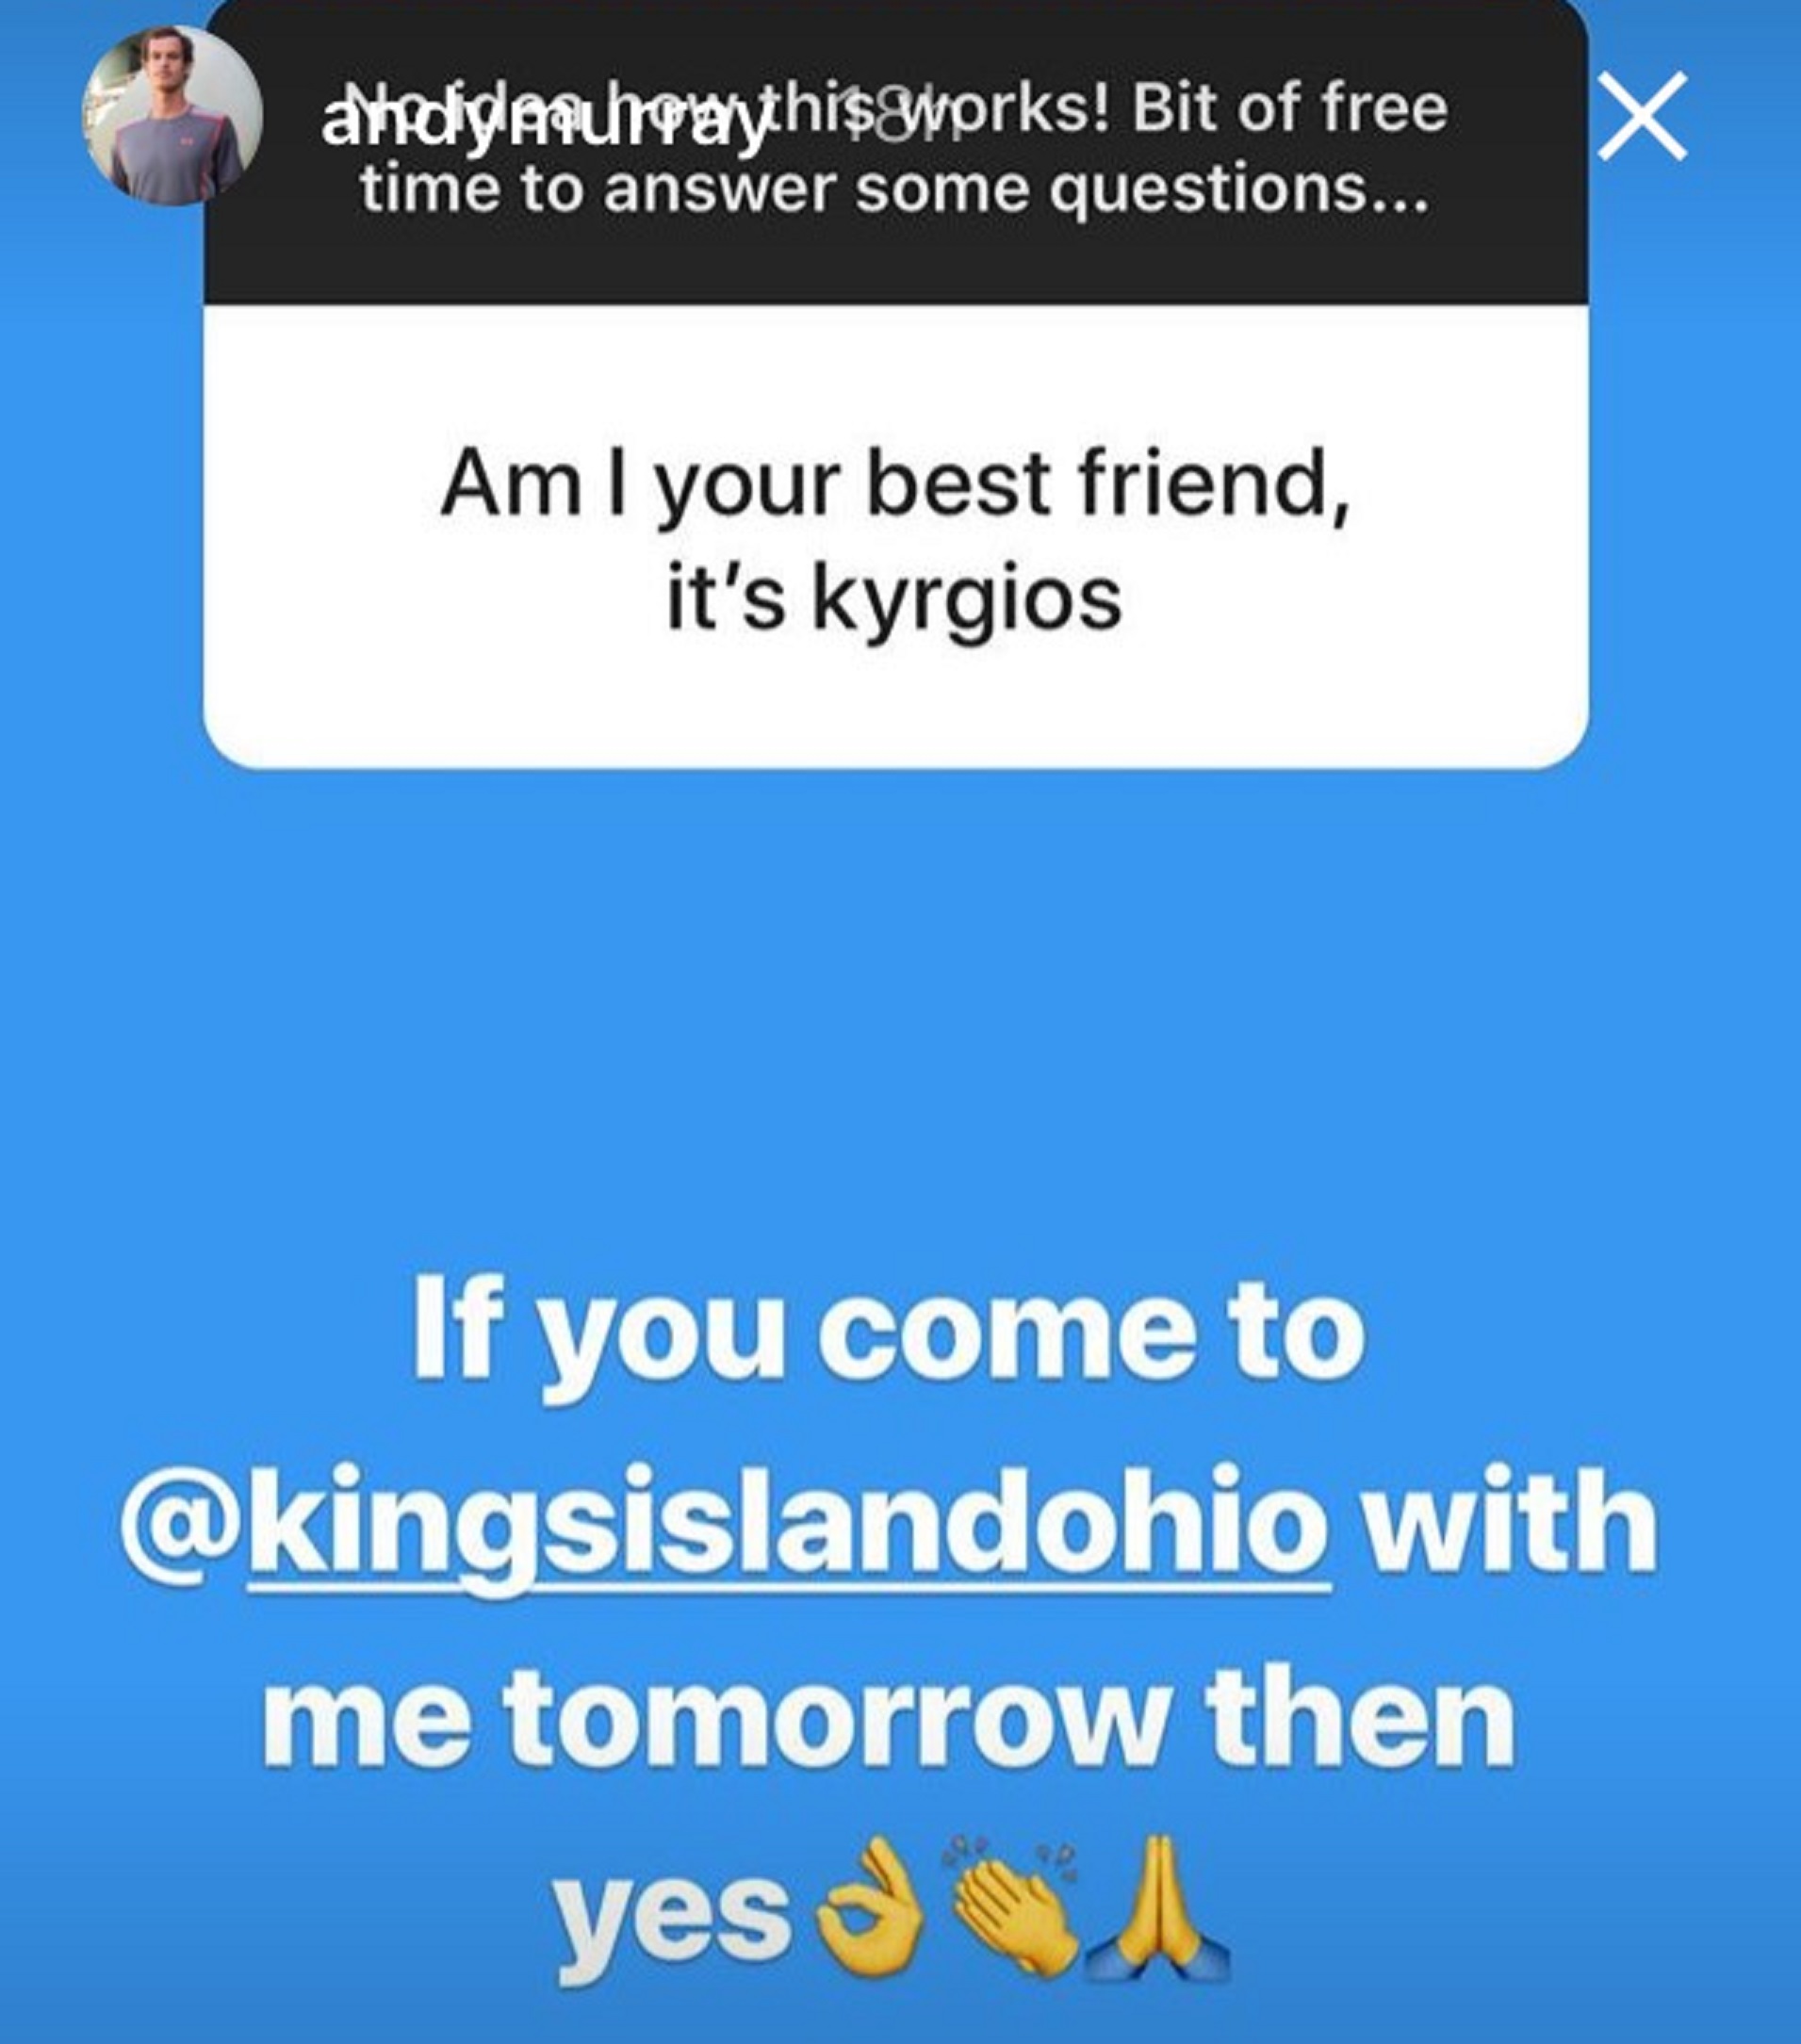 Andy Murray answers questions on his Instagram Story